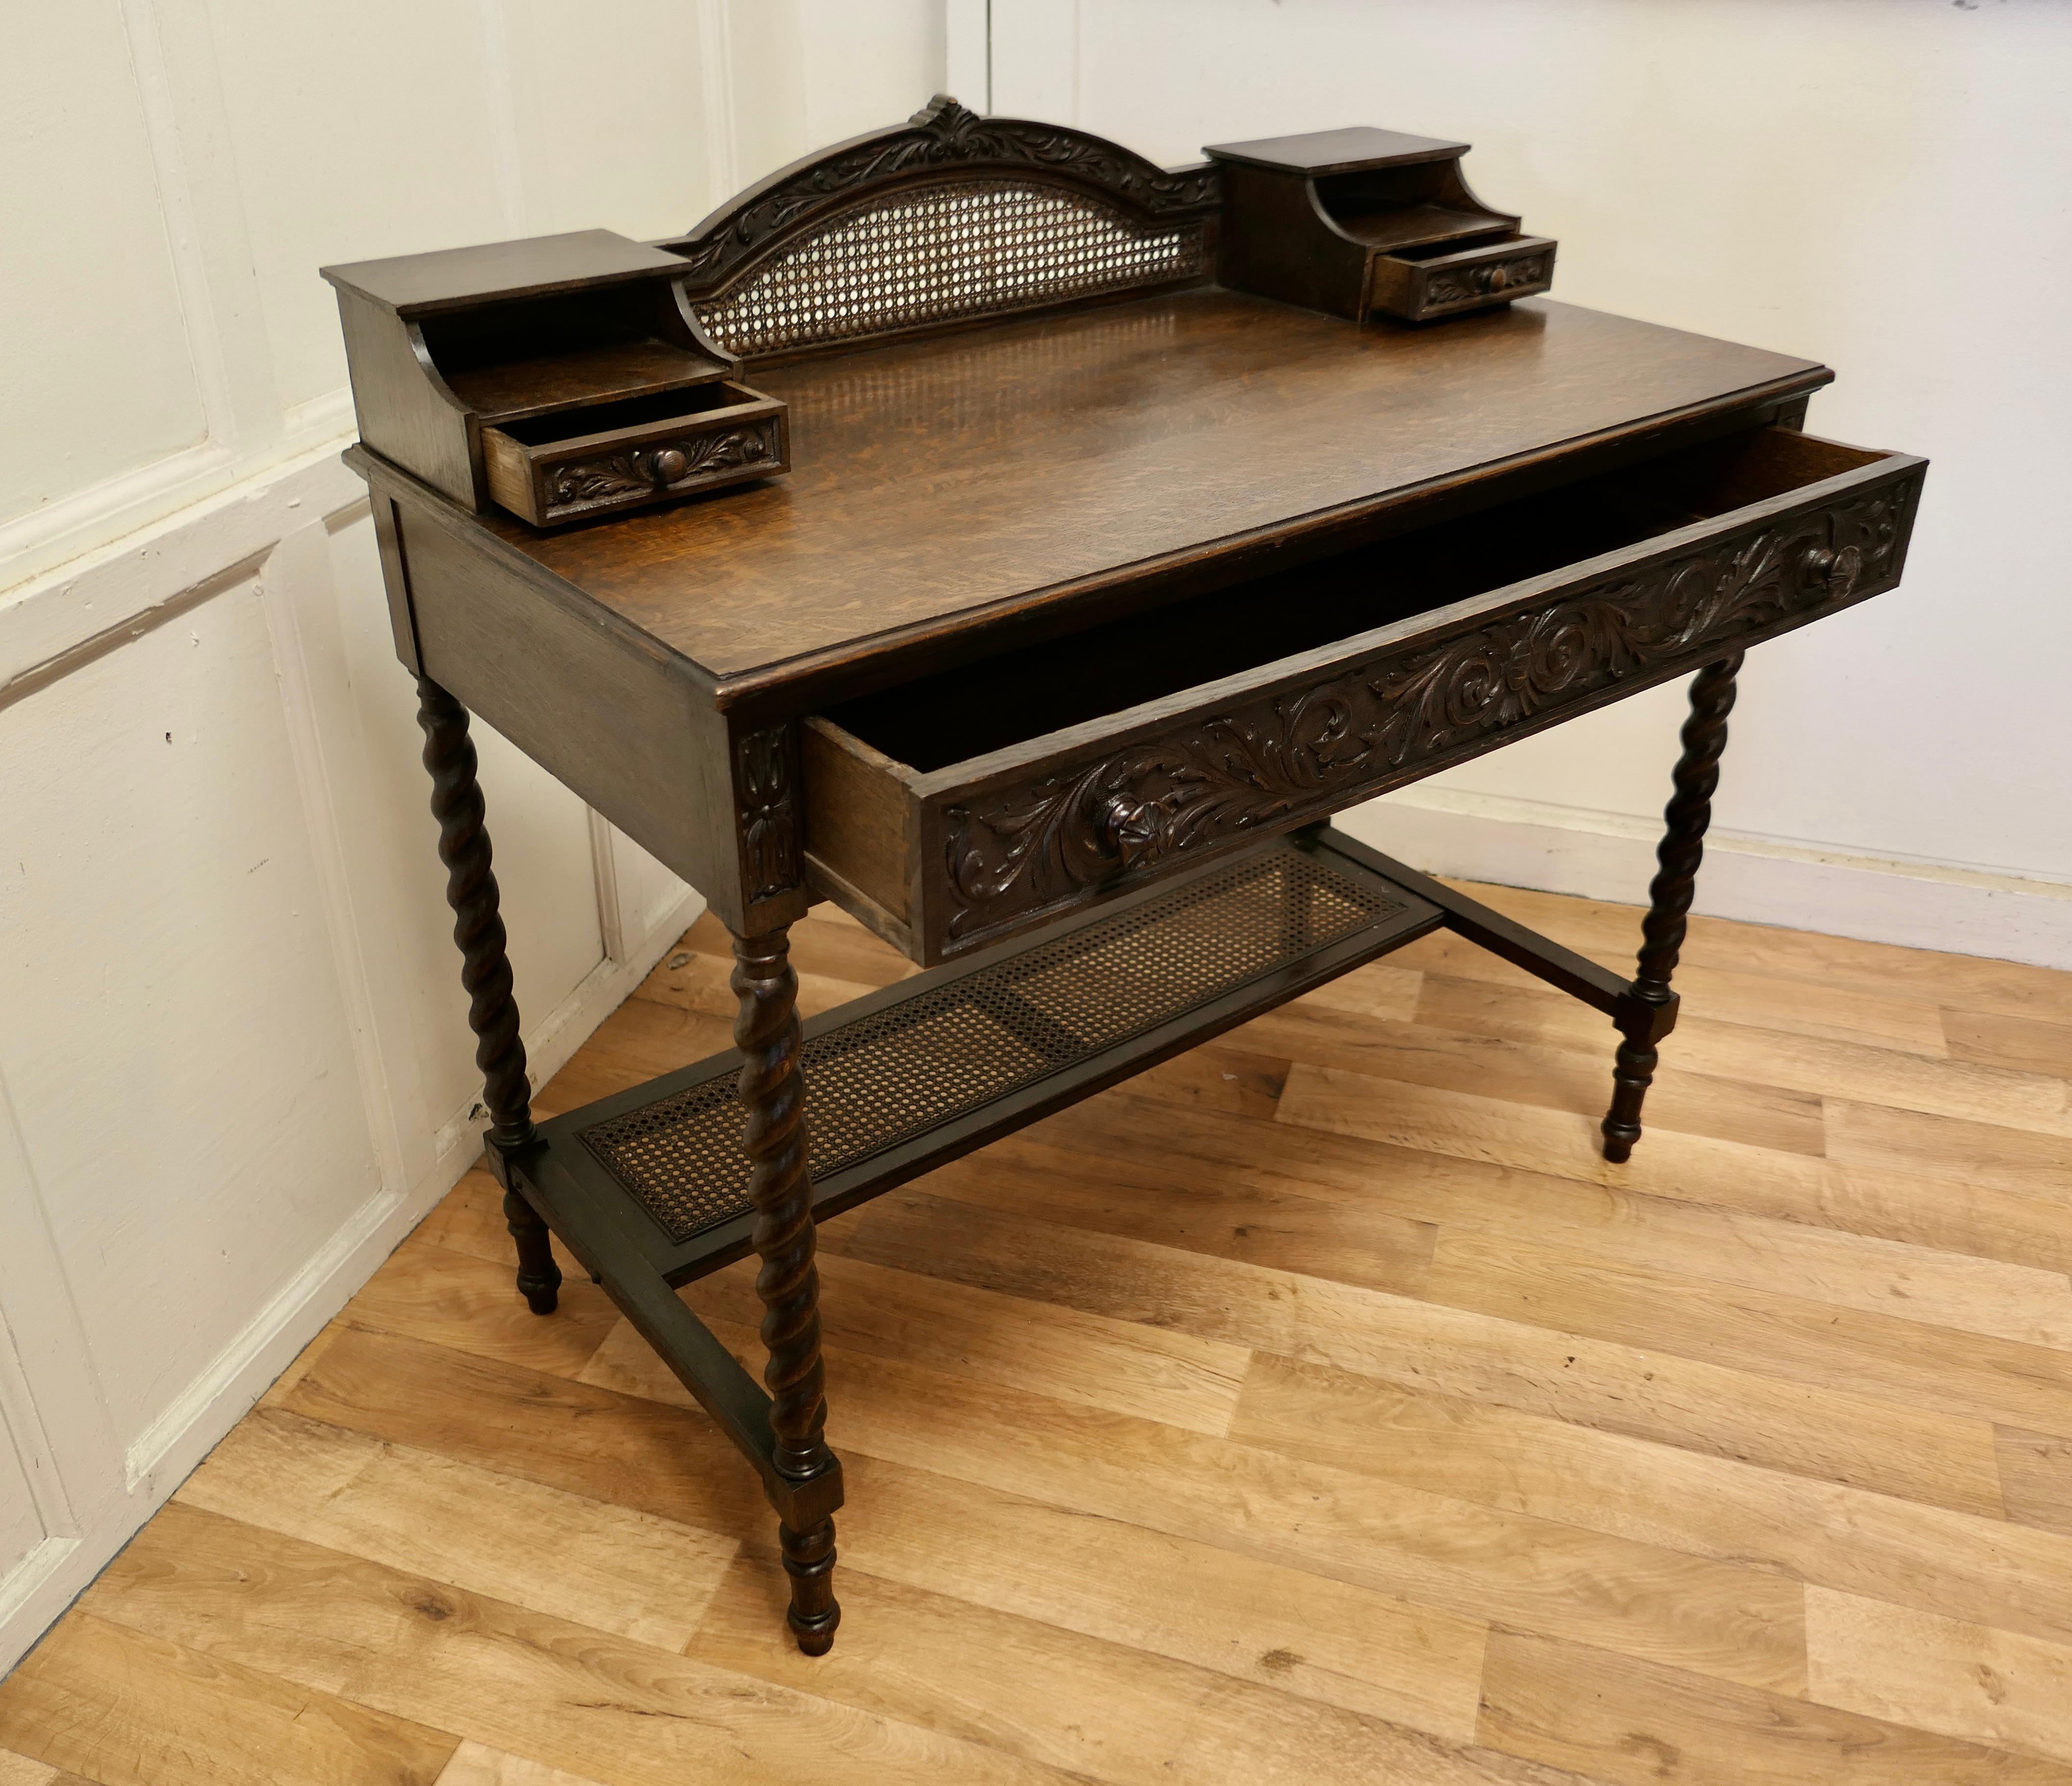 Carved oak and rattan reception desk


The Desk stands on slender barley twist turned legs with a long Bergèr stretcher towards the back, this matches the arched gallery at the top
The Desk has one long drawer with a beautifully carved frieze